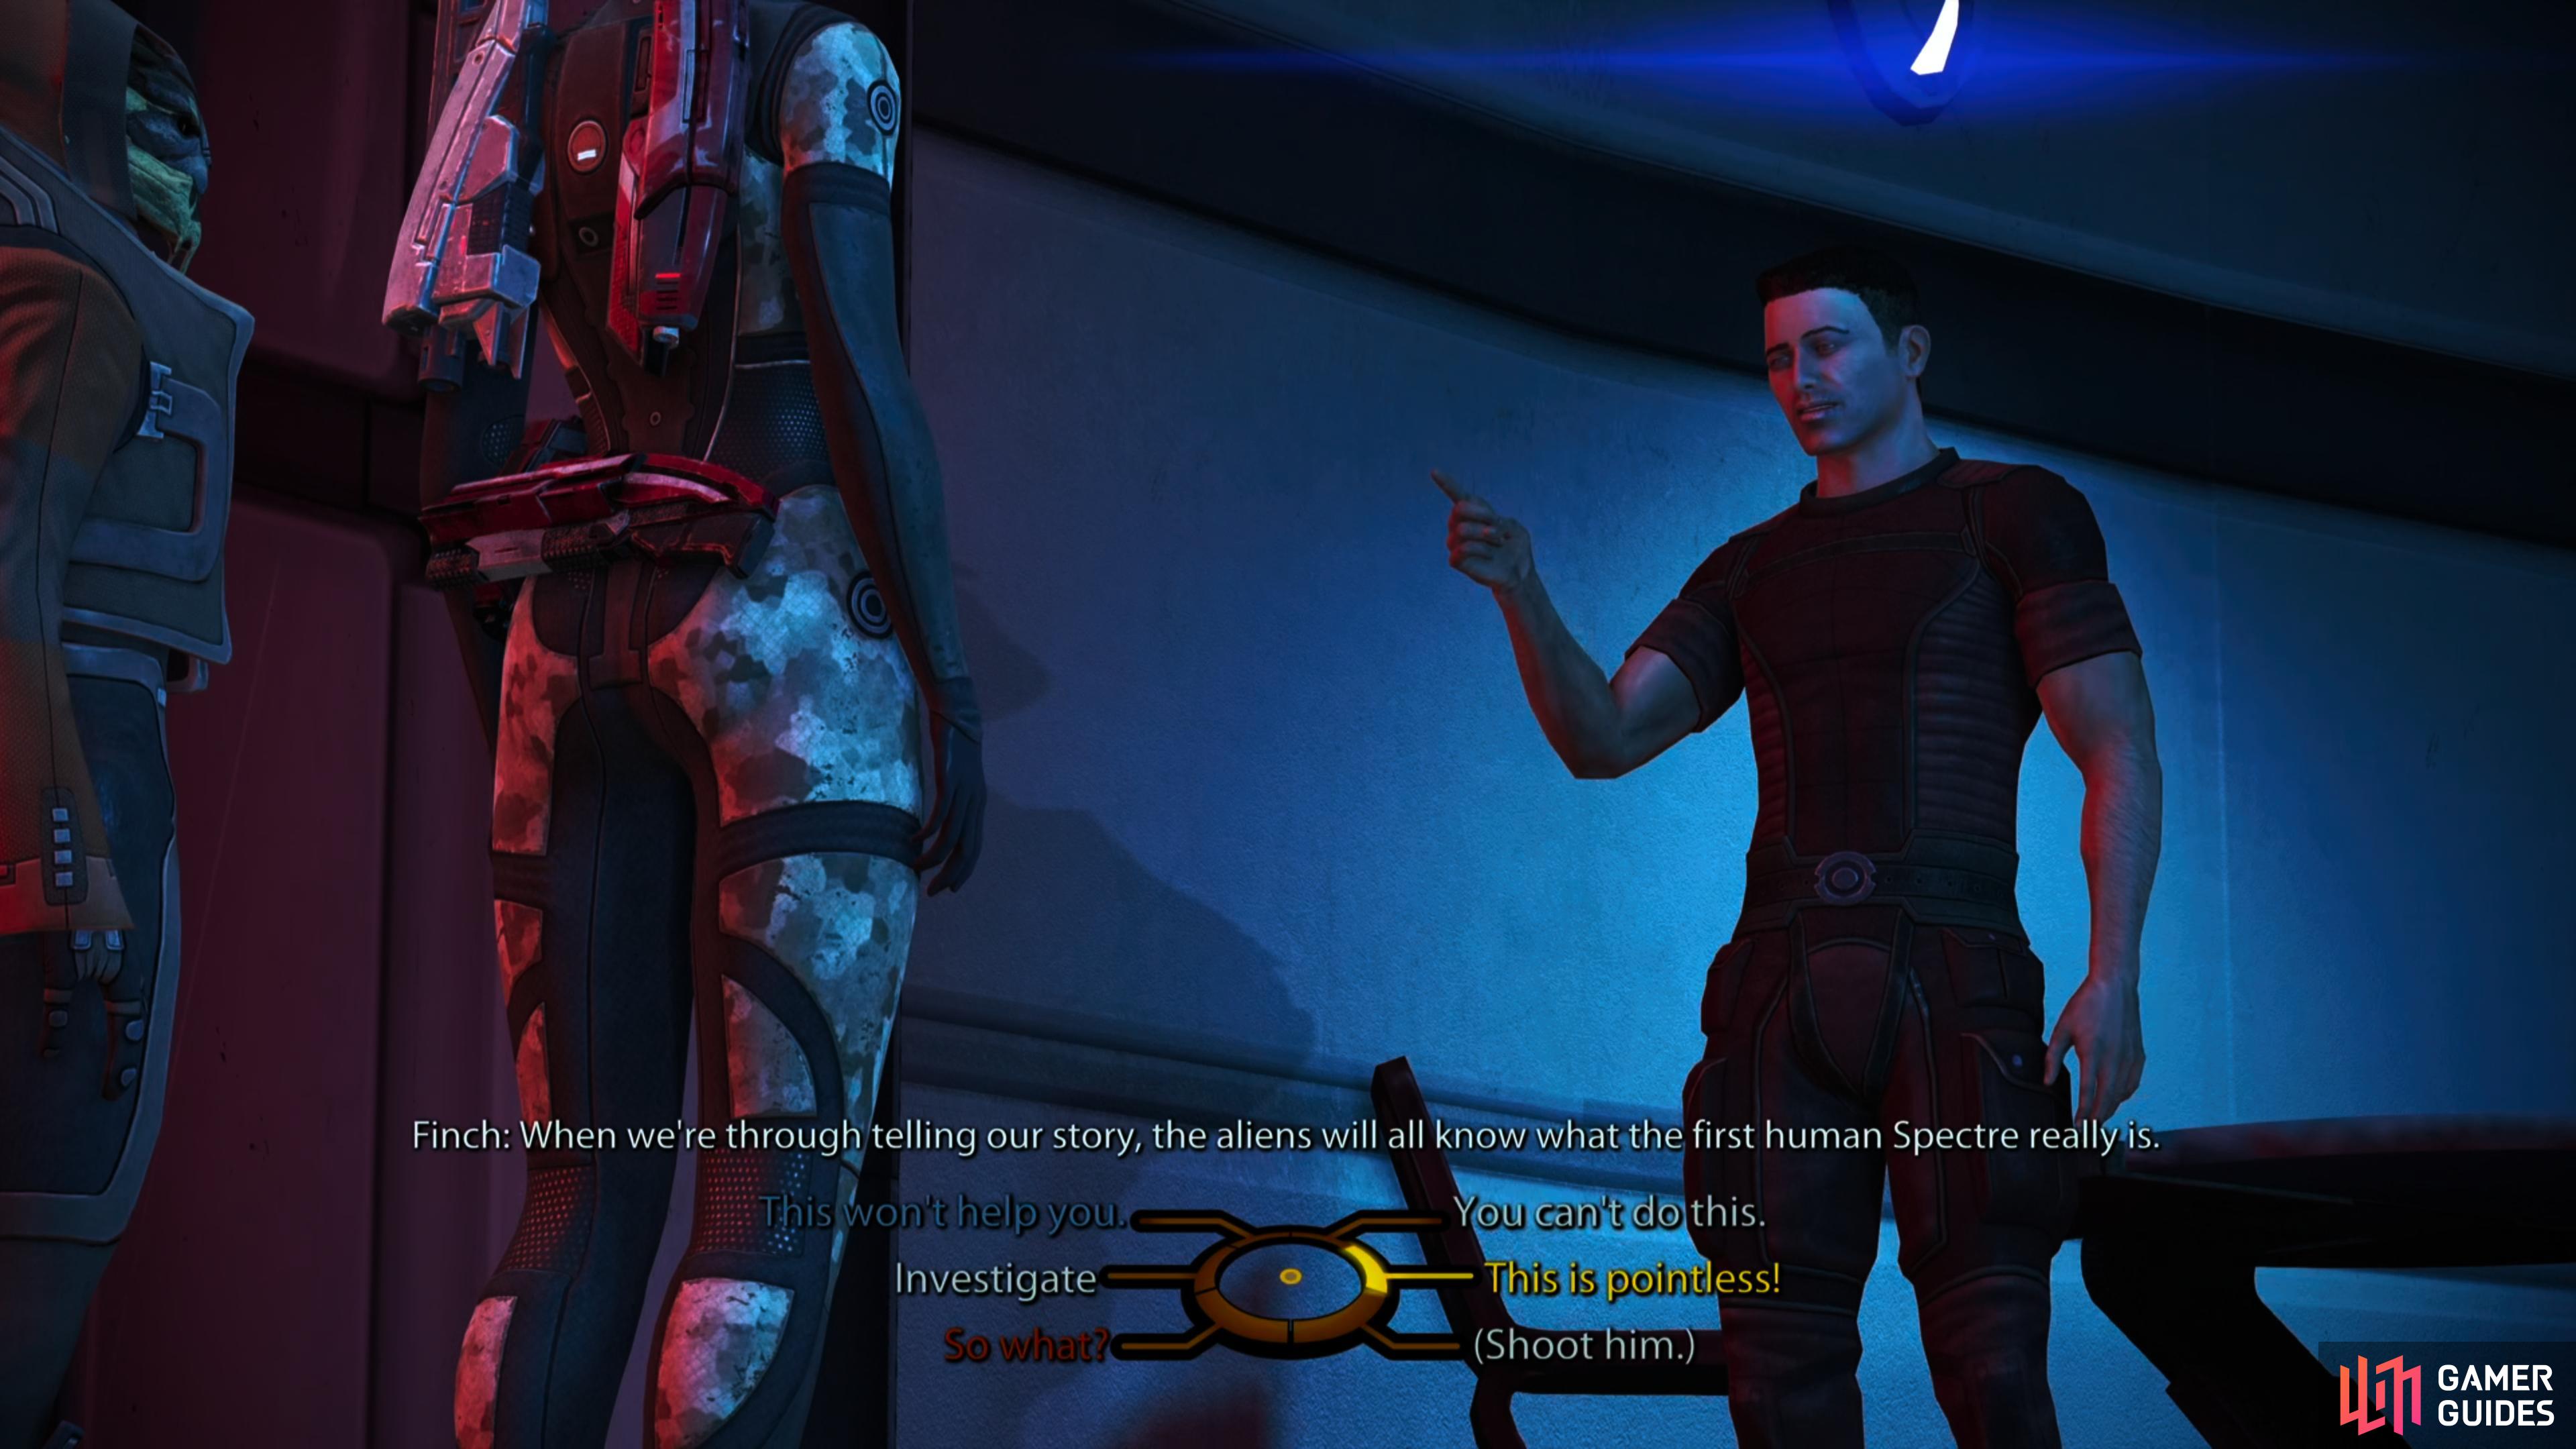 You can either convince the turian guard to let his prisoner go, or deal with an annoyed Finch.